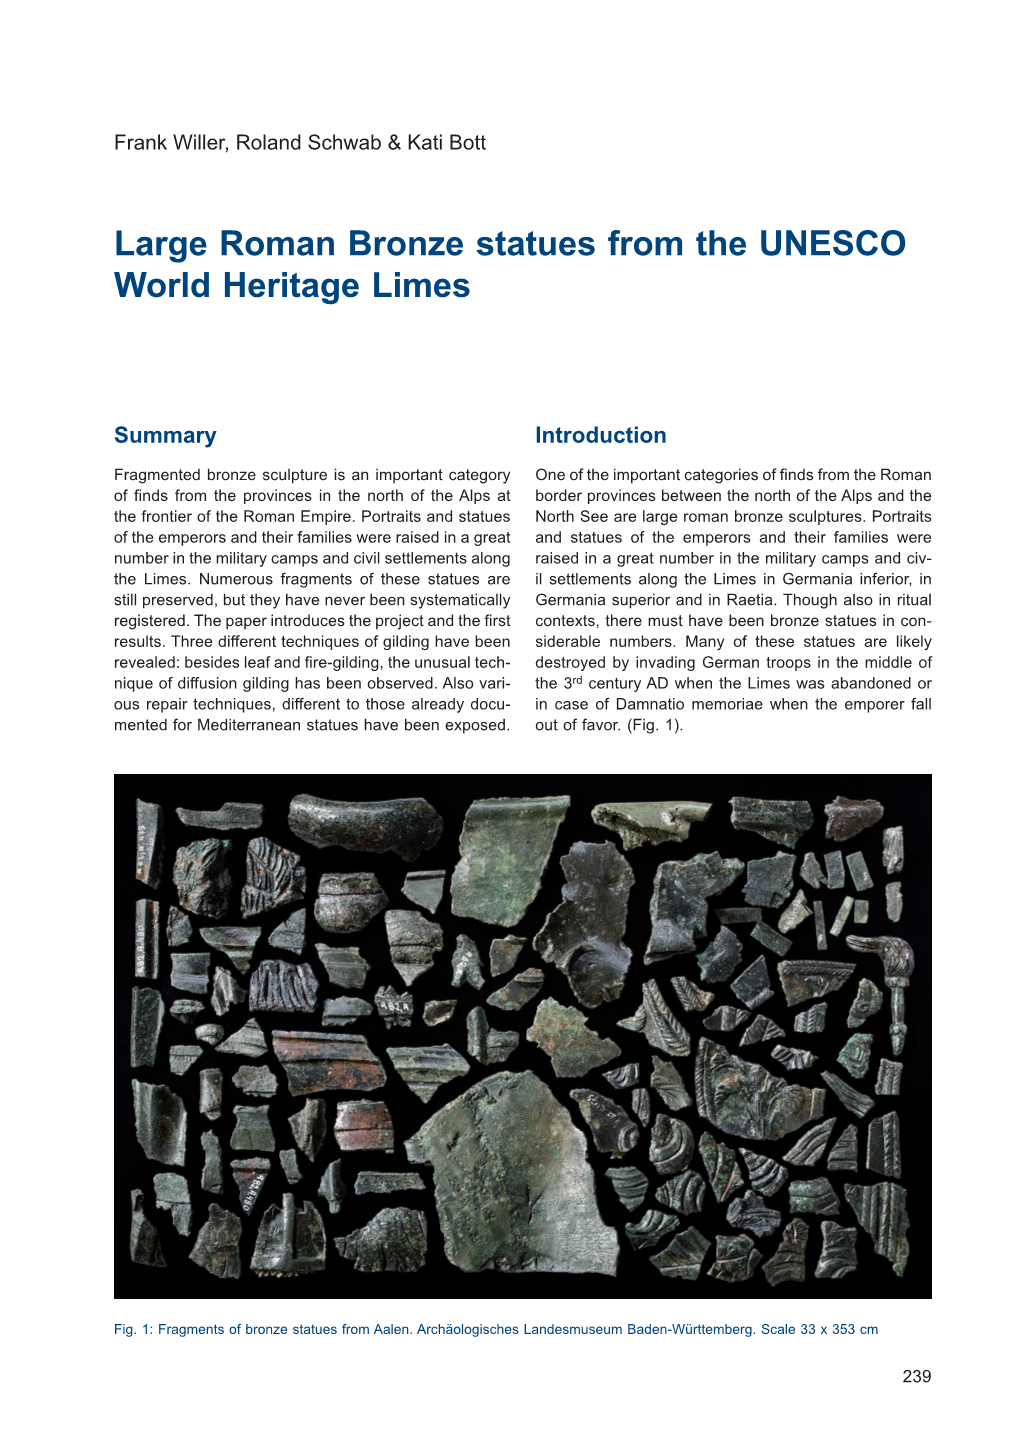 Large Roman Bronze Statues from the UNESCO World Heritage Limes